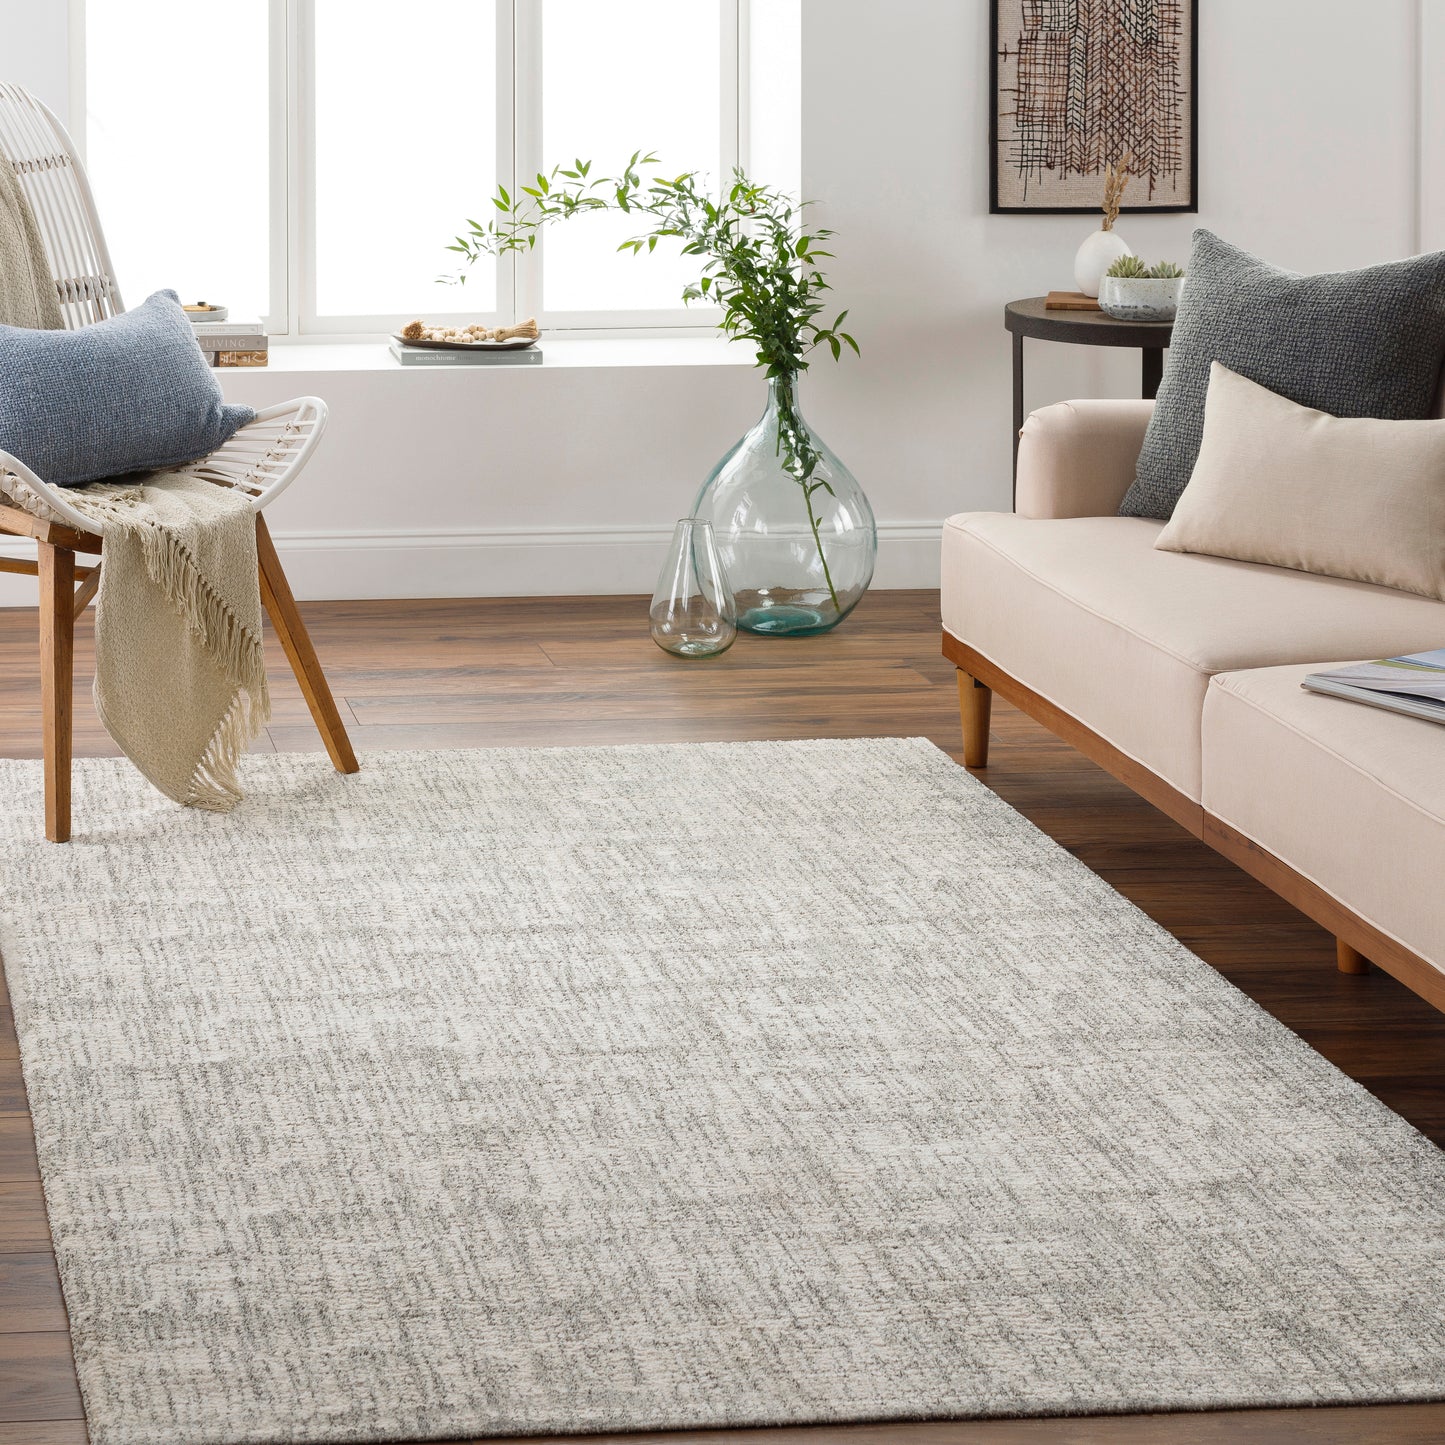 Gavic 26633 Machine Woven Synthetic Blend Indoor Area Rug by Surya Rugs